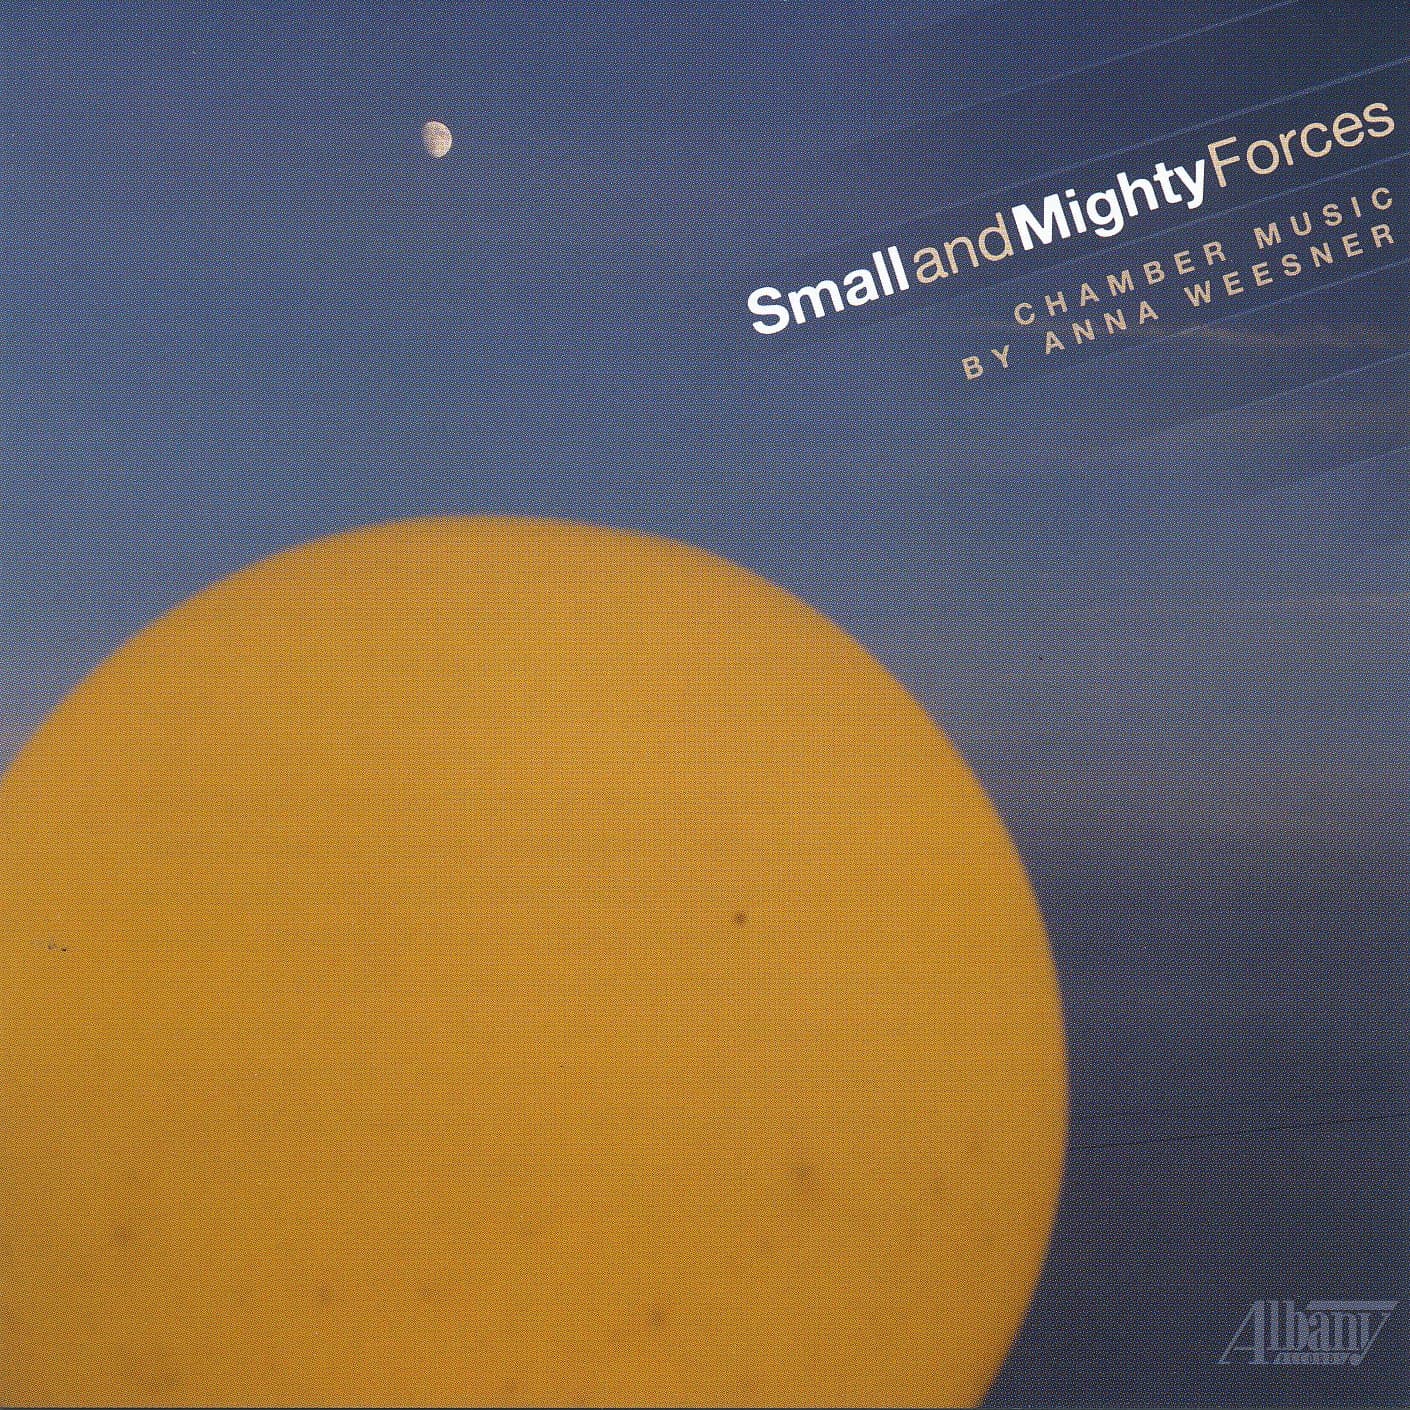 cover art for Small and Mighty Forces album